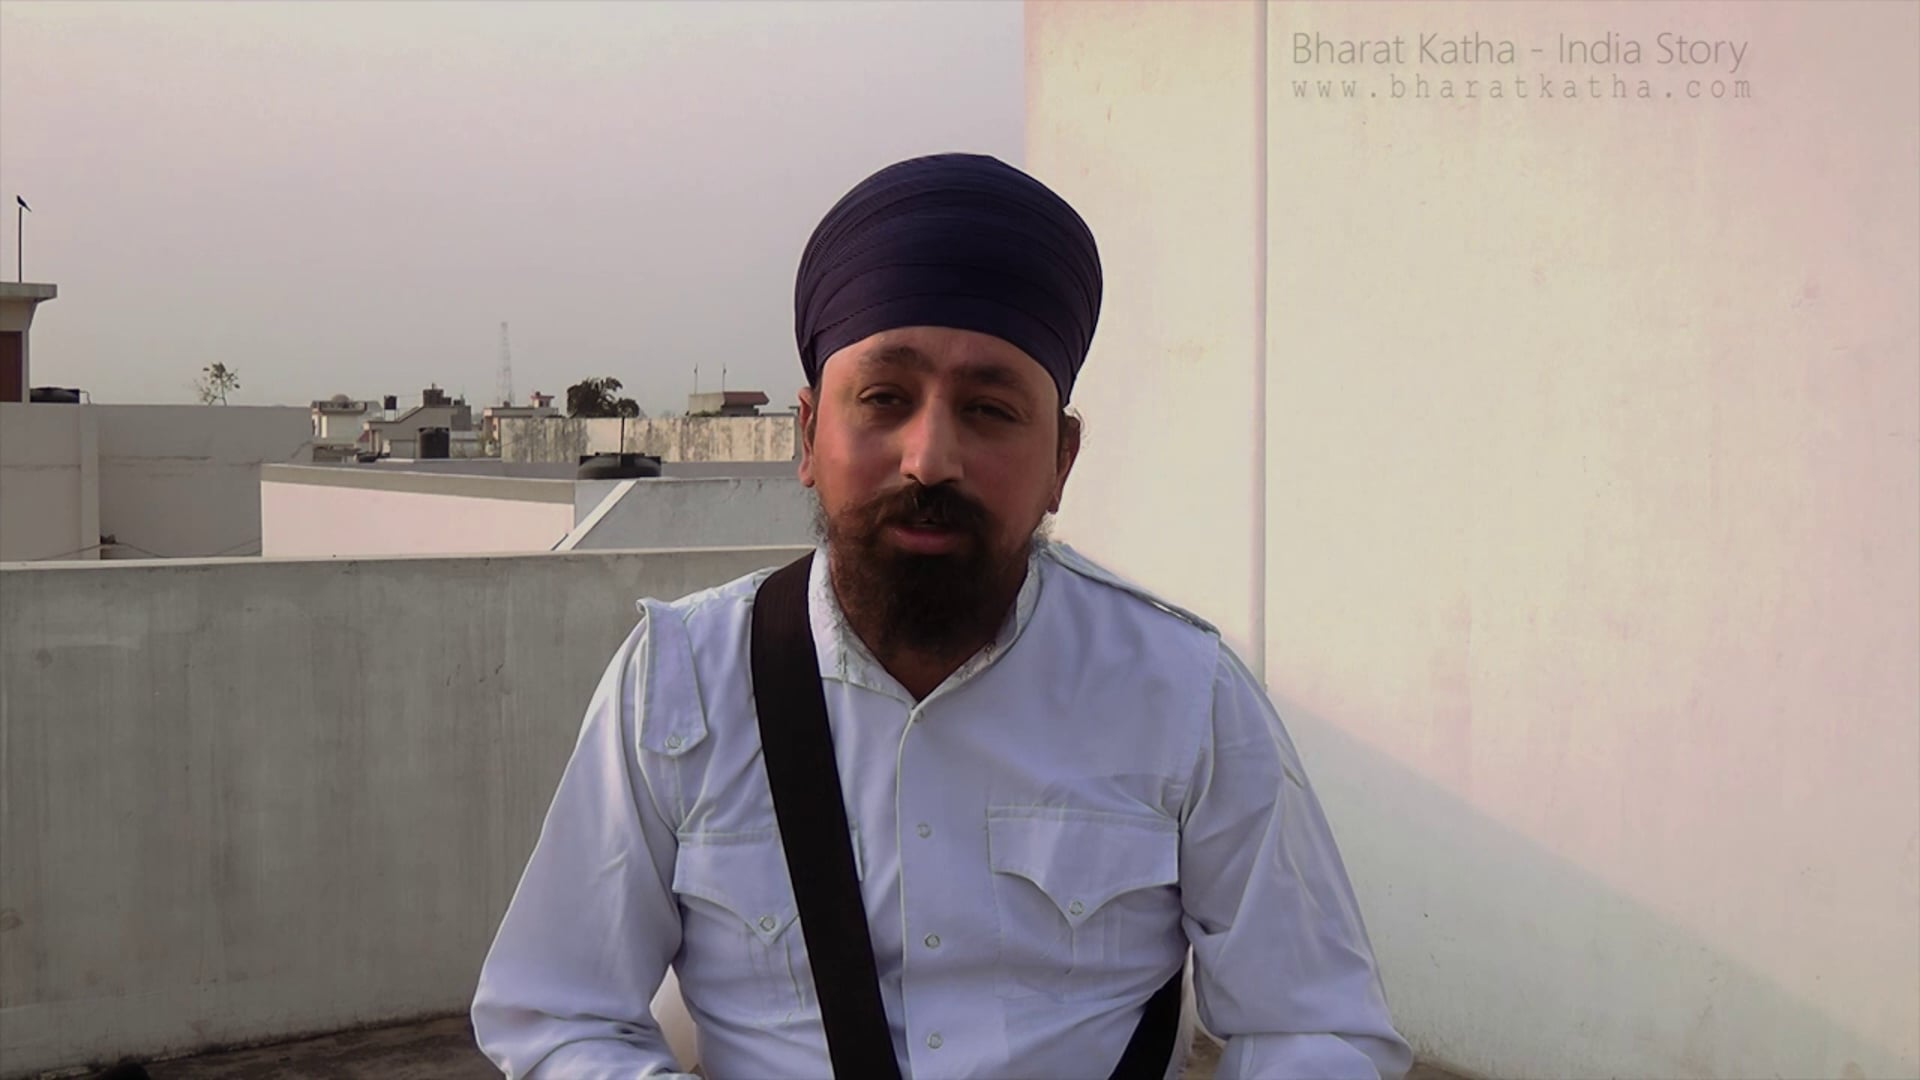 Tapinder Singh on traditions (with Subtitles in 5 Languages)